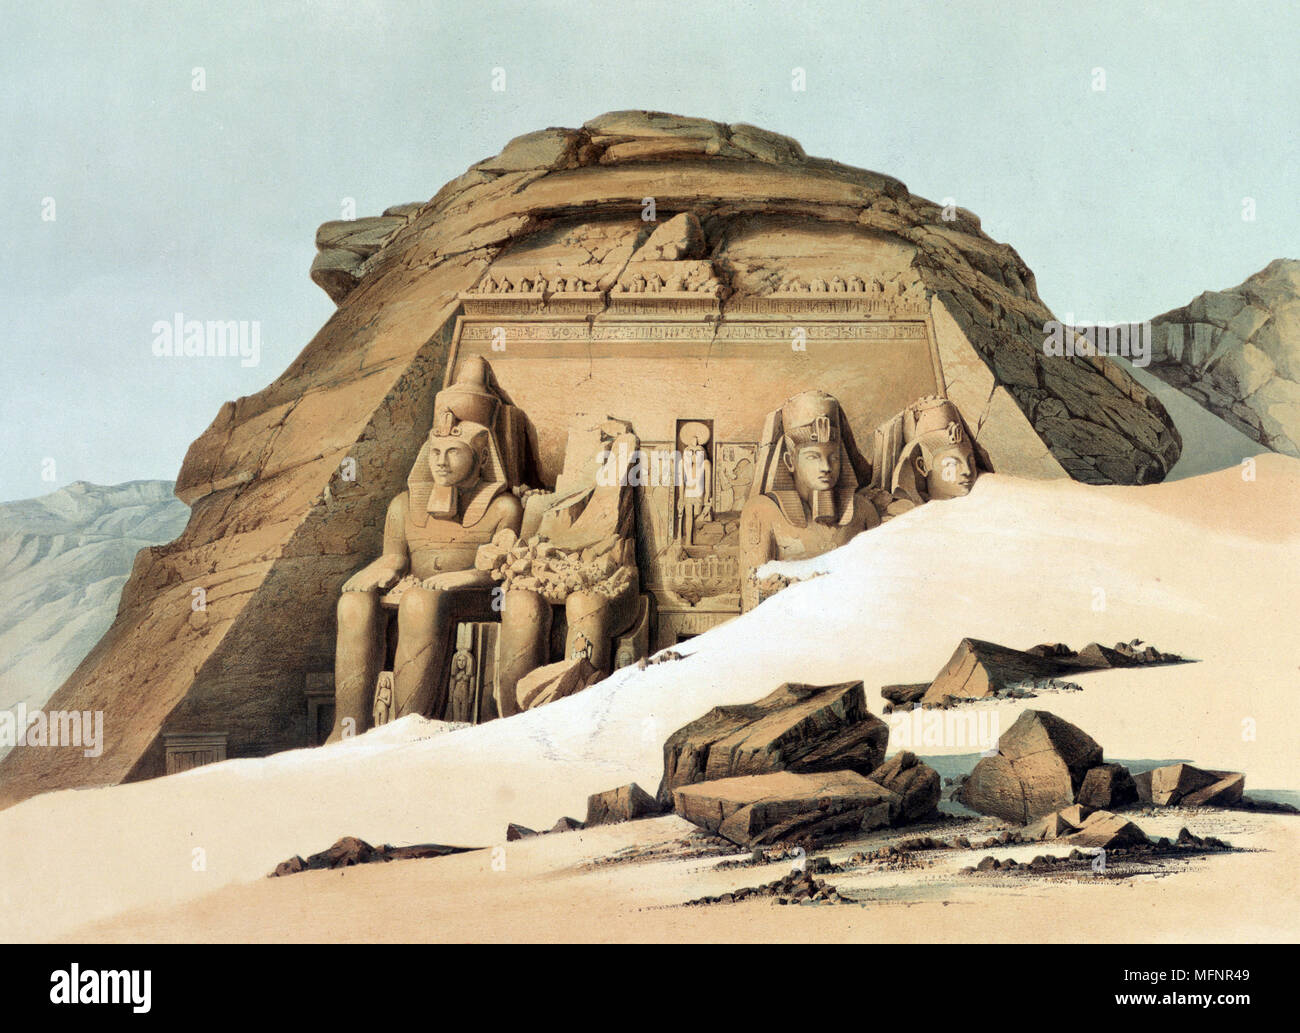 Rock Temple at Abu Simbel'. Lithograph after Karl Richard Lepsius (1810-1884) Prussian Egyptologist. Statues of Rameses (Ramses) II (ruled c1304-c1273 BC) outside main temple.  Archaeology Religion Mythology Ancient Egyptian Stock Photo